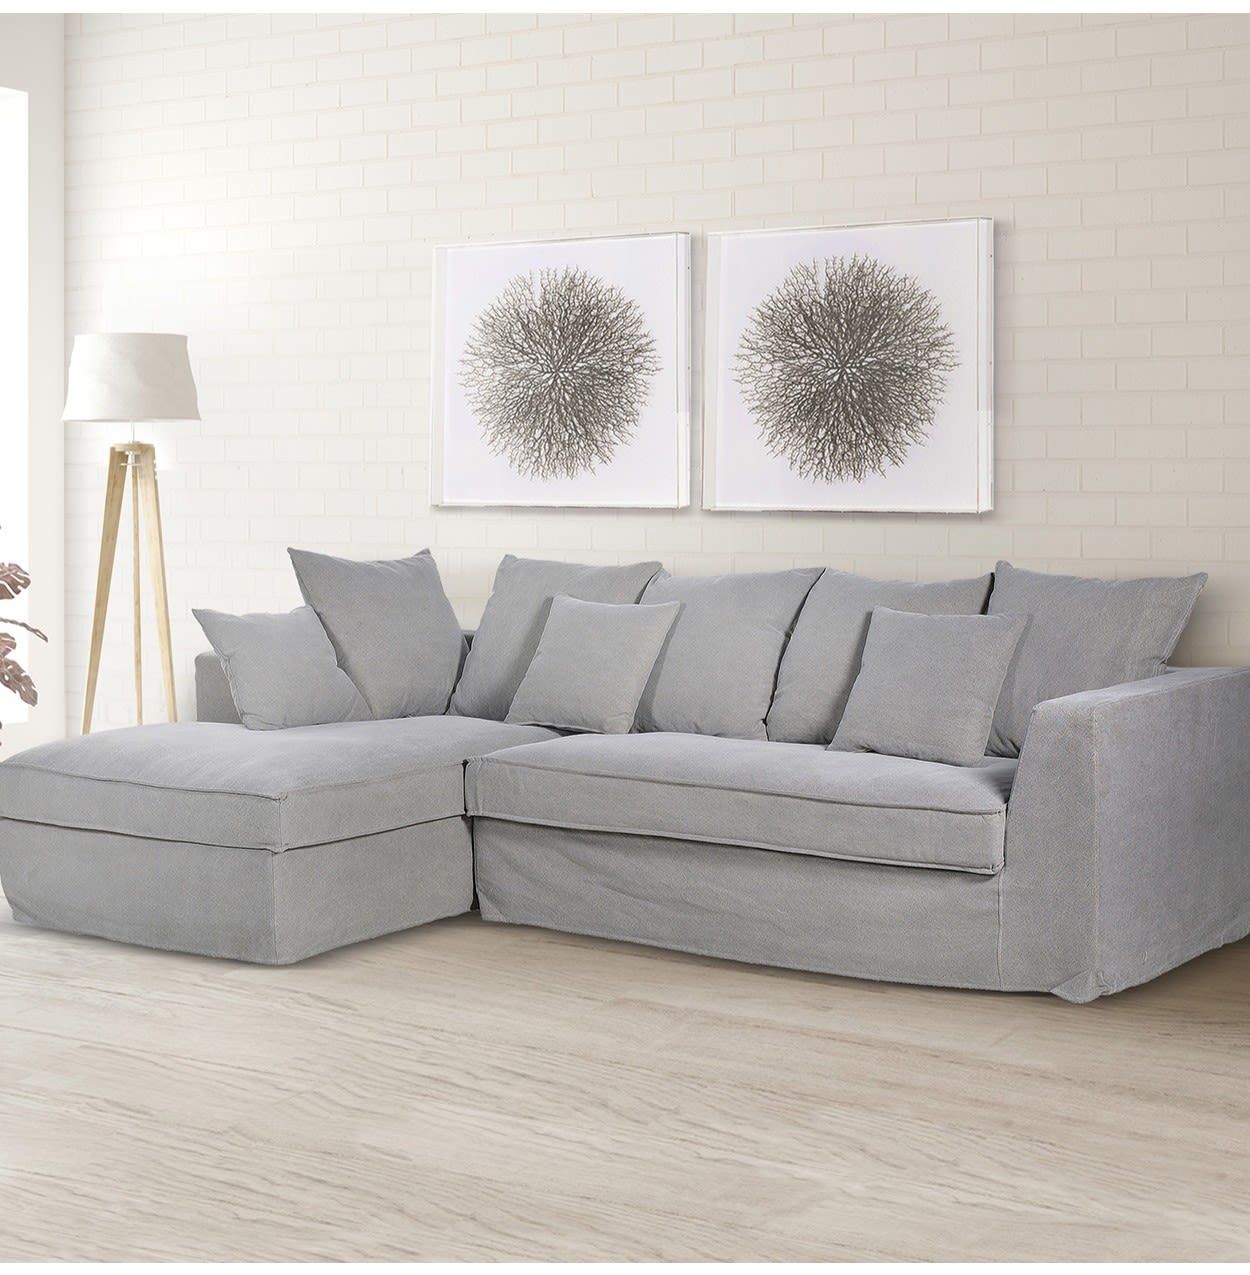 Grey Cotton Linen Fabric Corner Sofa | Nicky Cornell With Light Charcoal Linen Sofas (View 15 of 15)